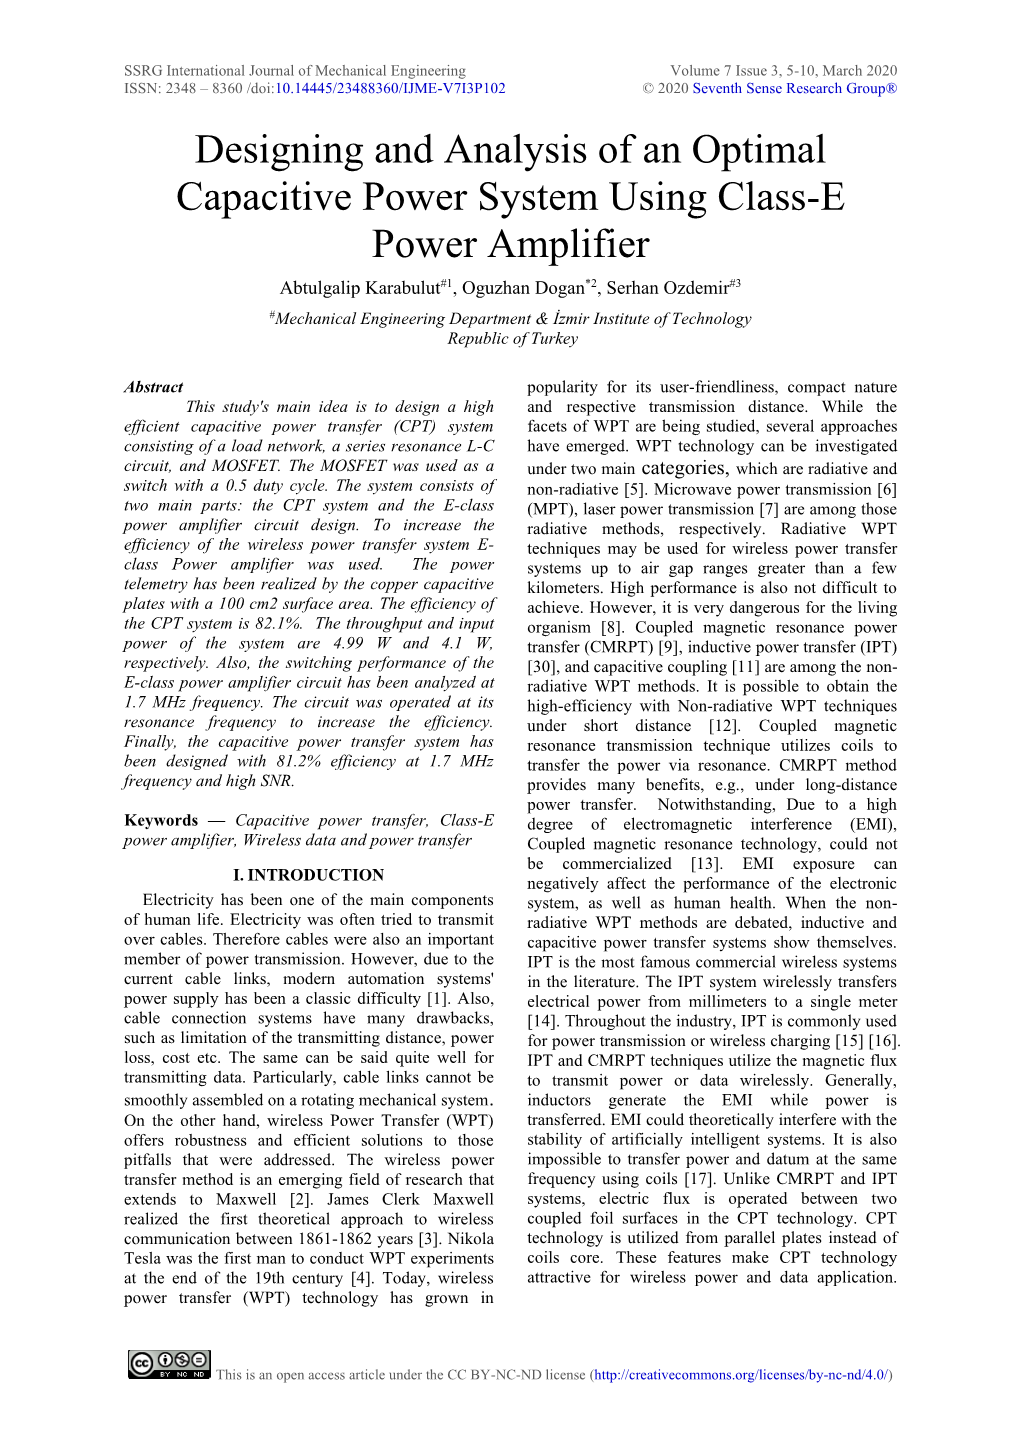 Designing and Analysis of an Optimal Capacitive Power System Using